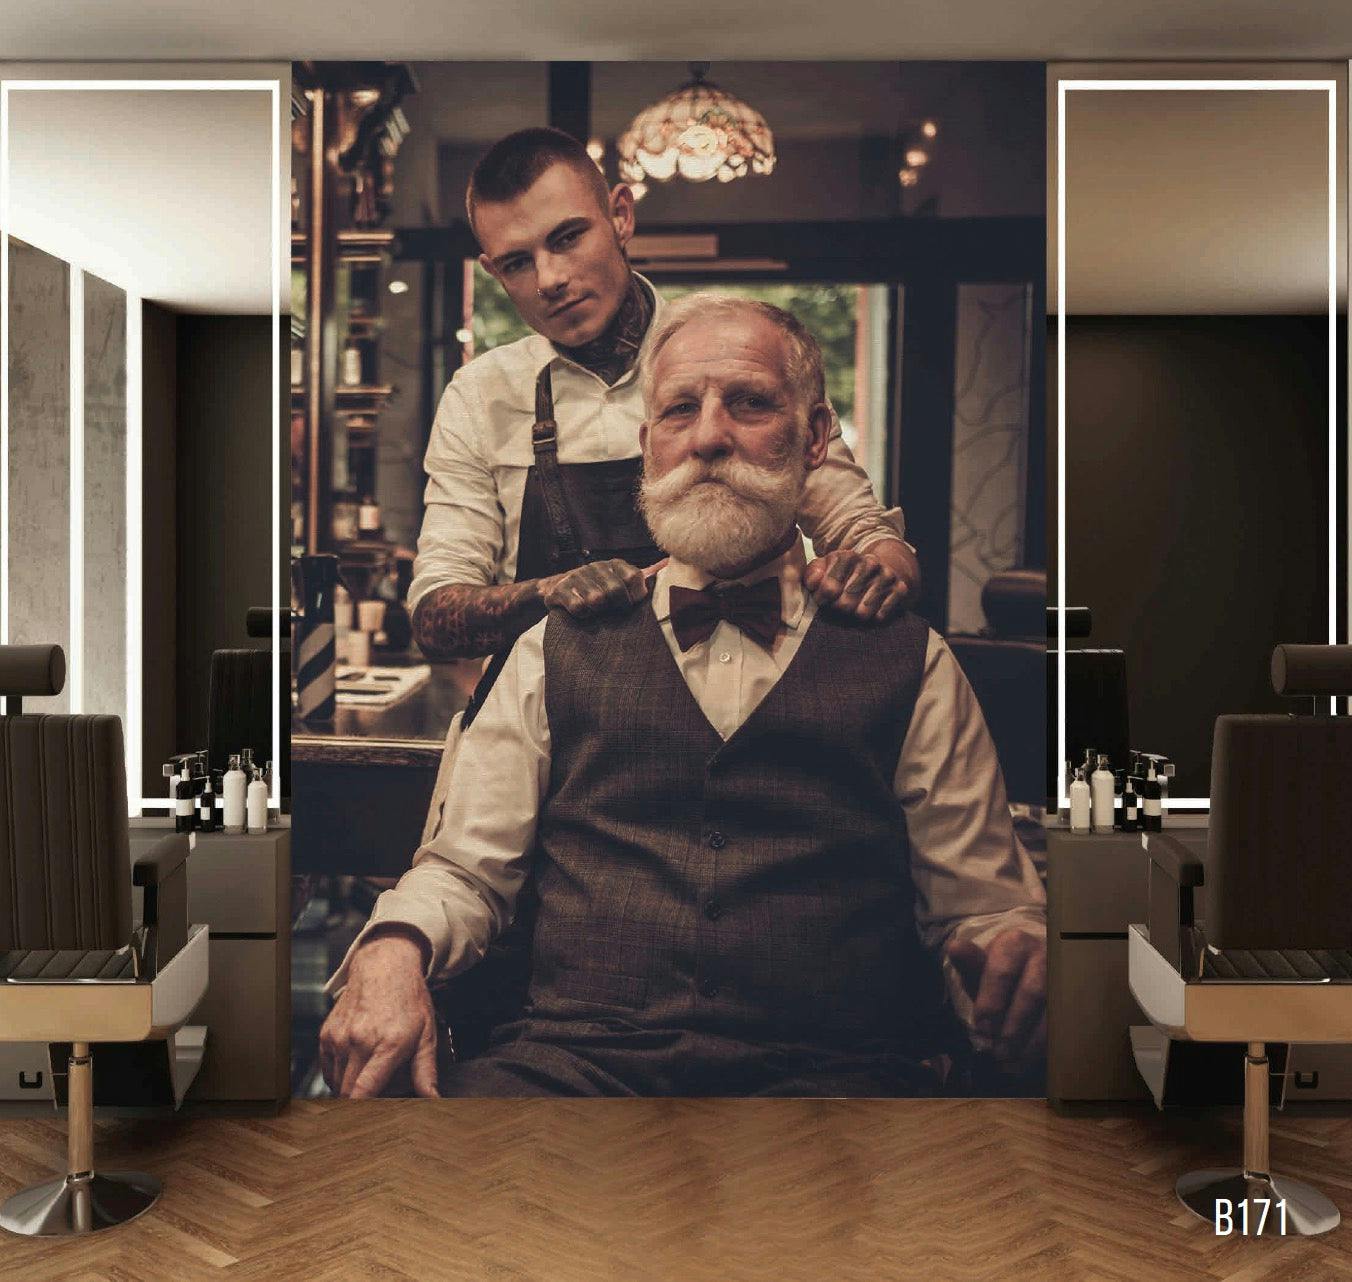 mural of well groomed customer in chair with professional looking barber behind him in old fashioned setting